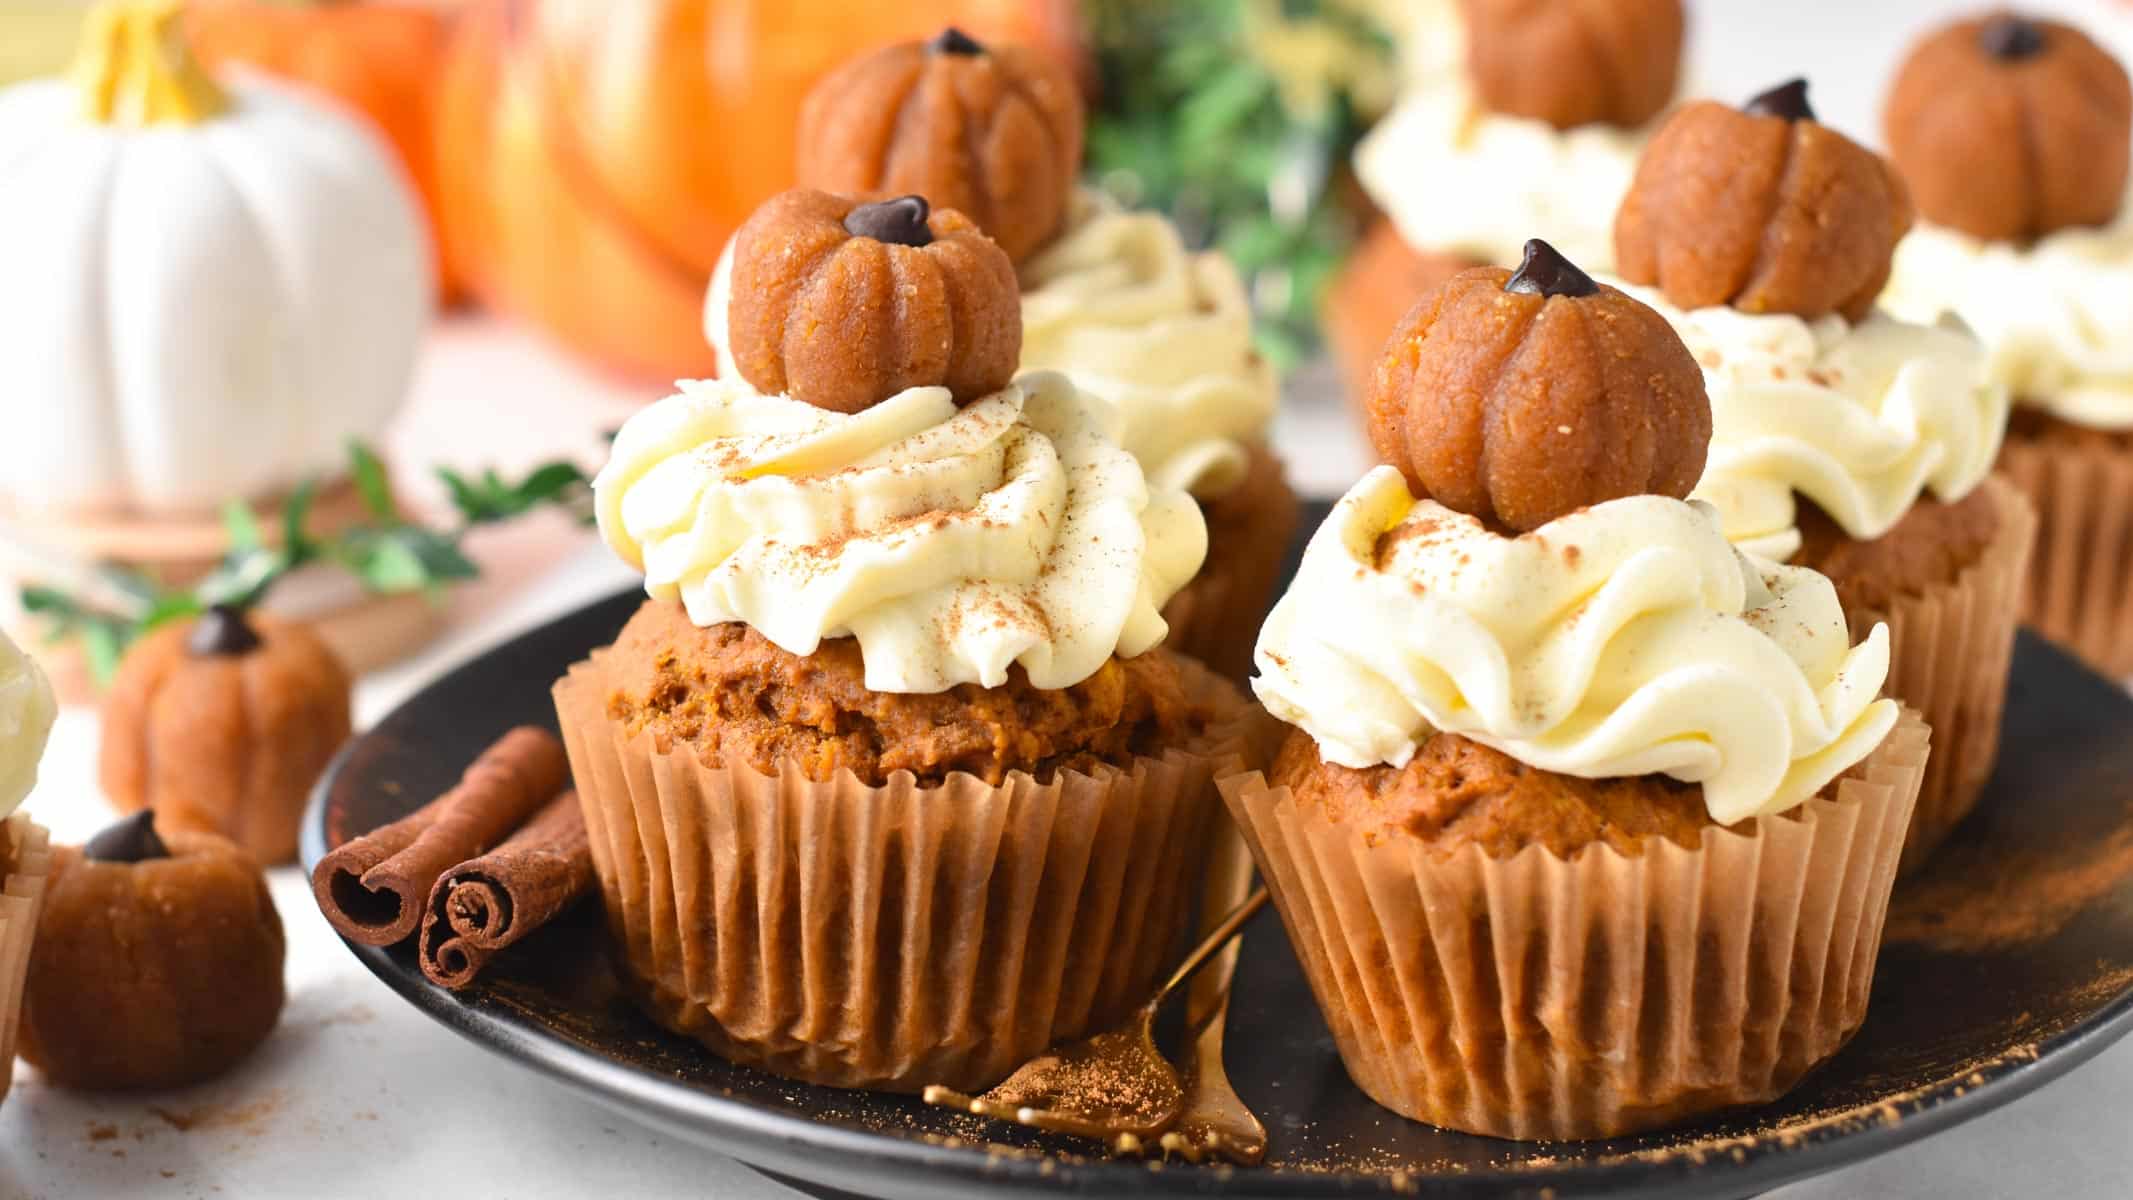 A plate filled with vegan pumpkin cupcakes frosted with vegan cream cheese frosting and little pumpkin cupcake topper.